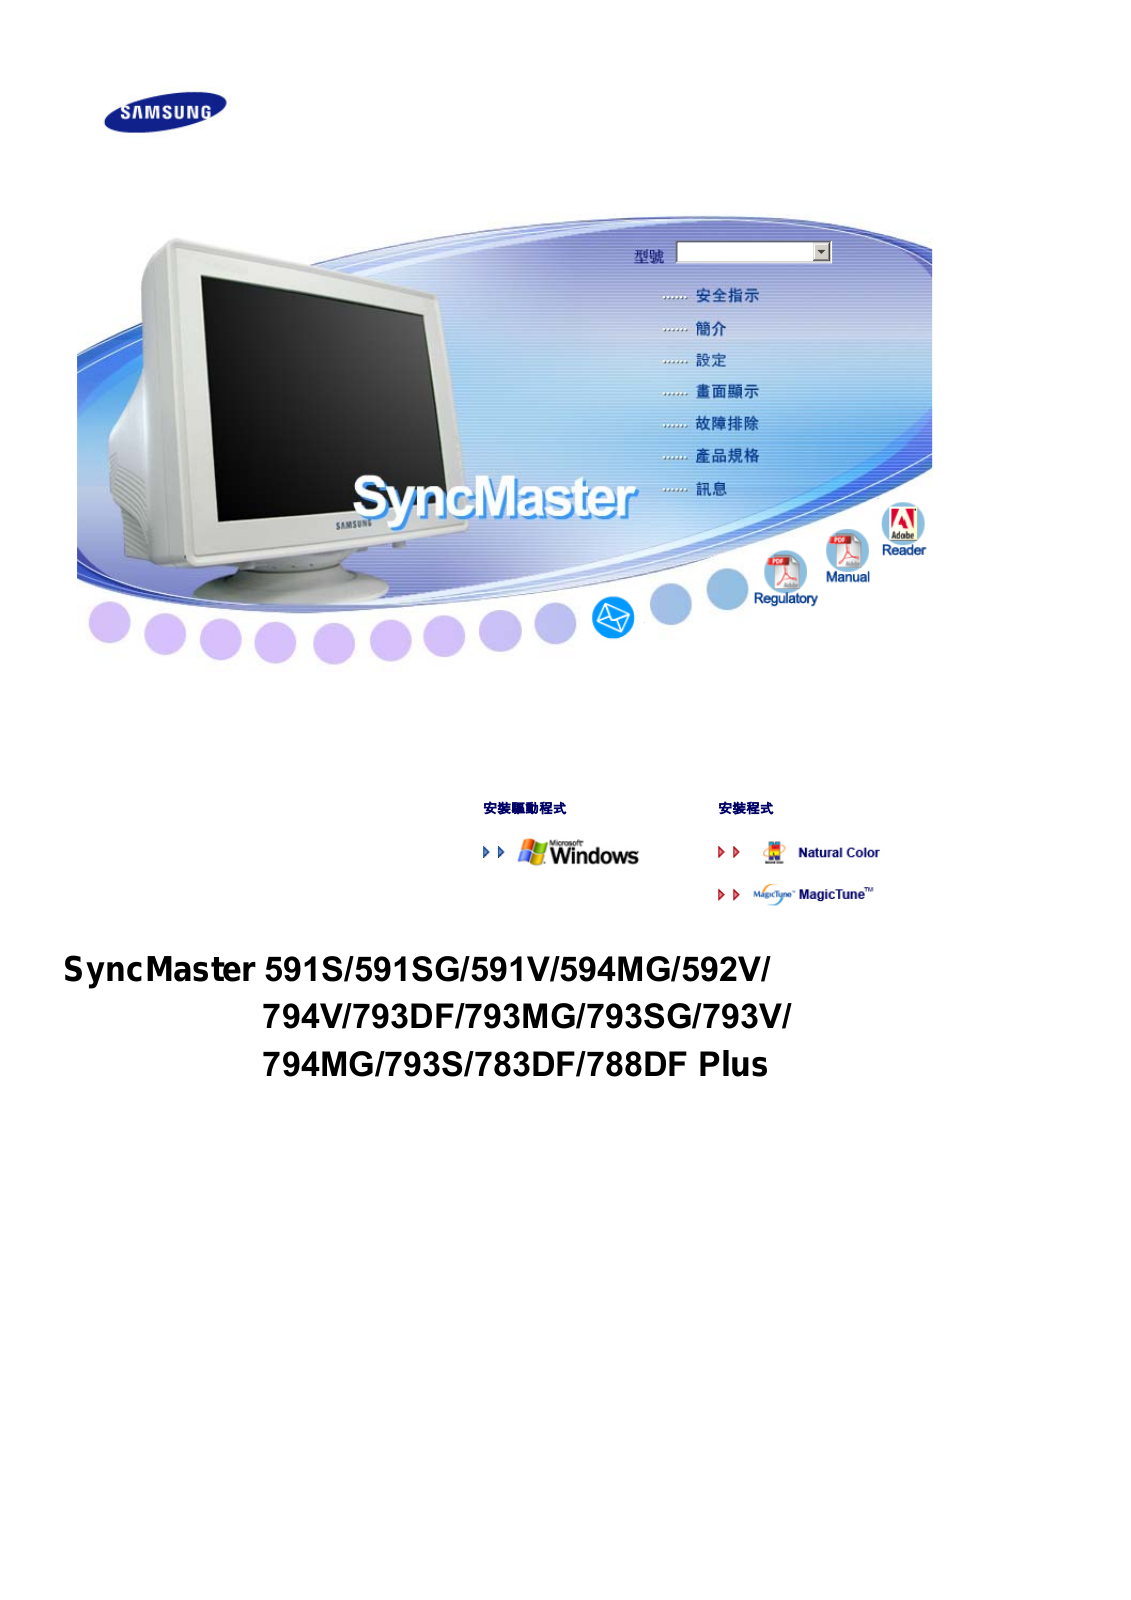 Samsung SYNCMASTER 793MG, SYNCMASTER 793DF, SYNCMASTER 788DF PLUS, SYNCMASTER 591S User Manual